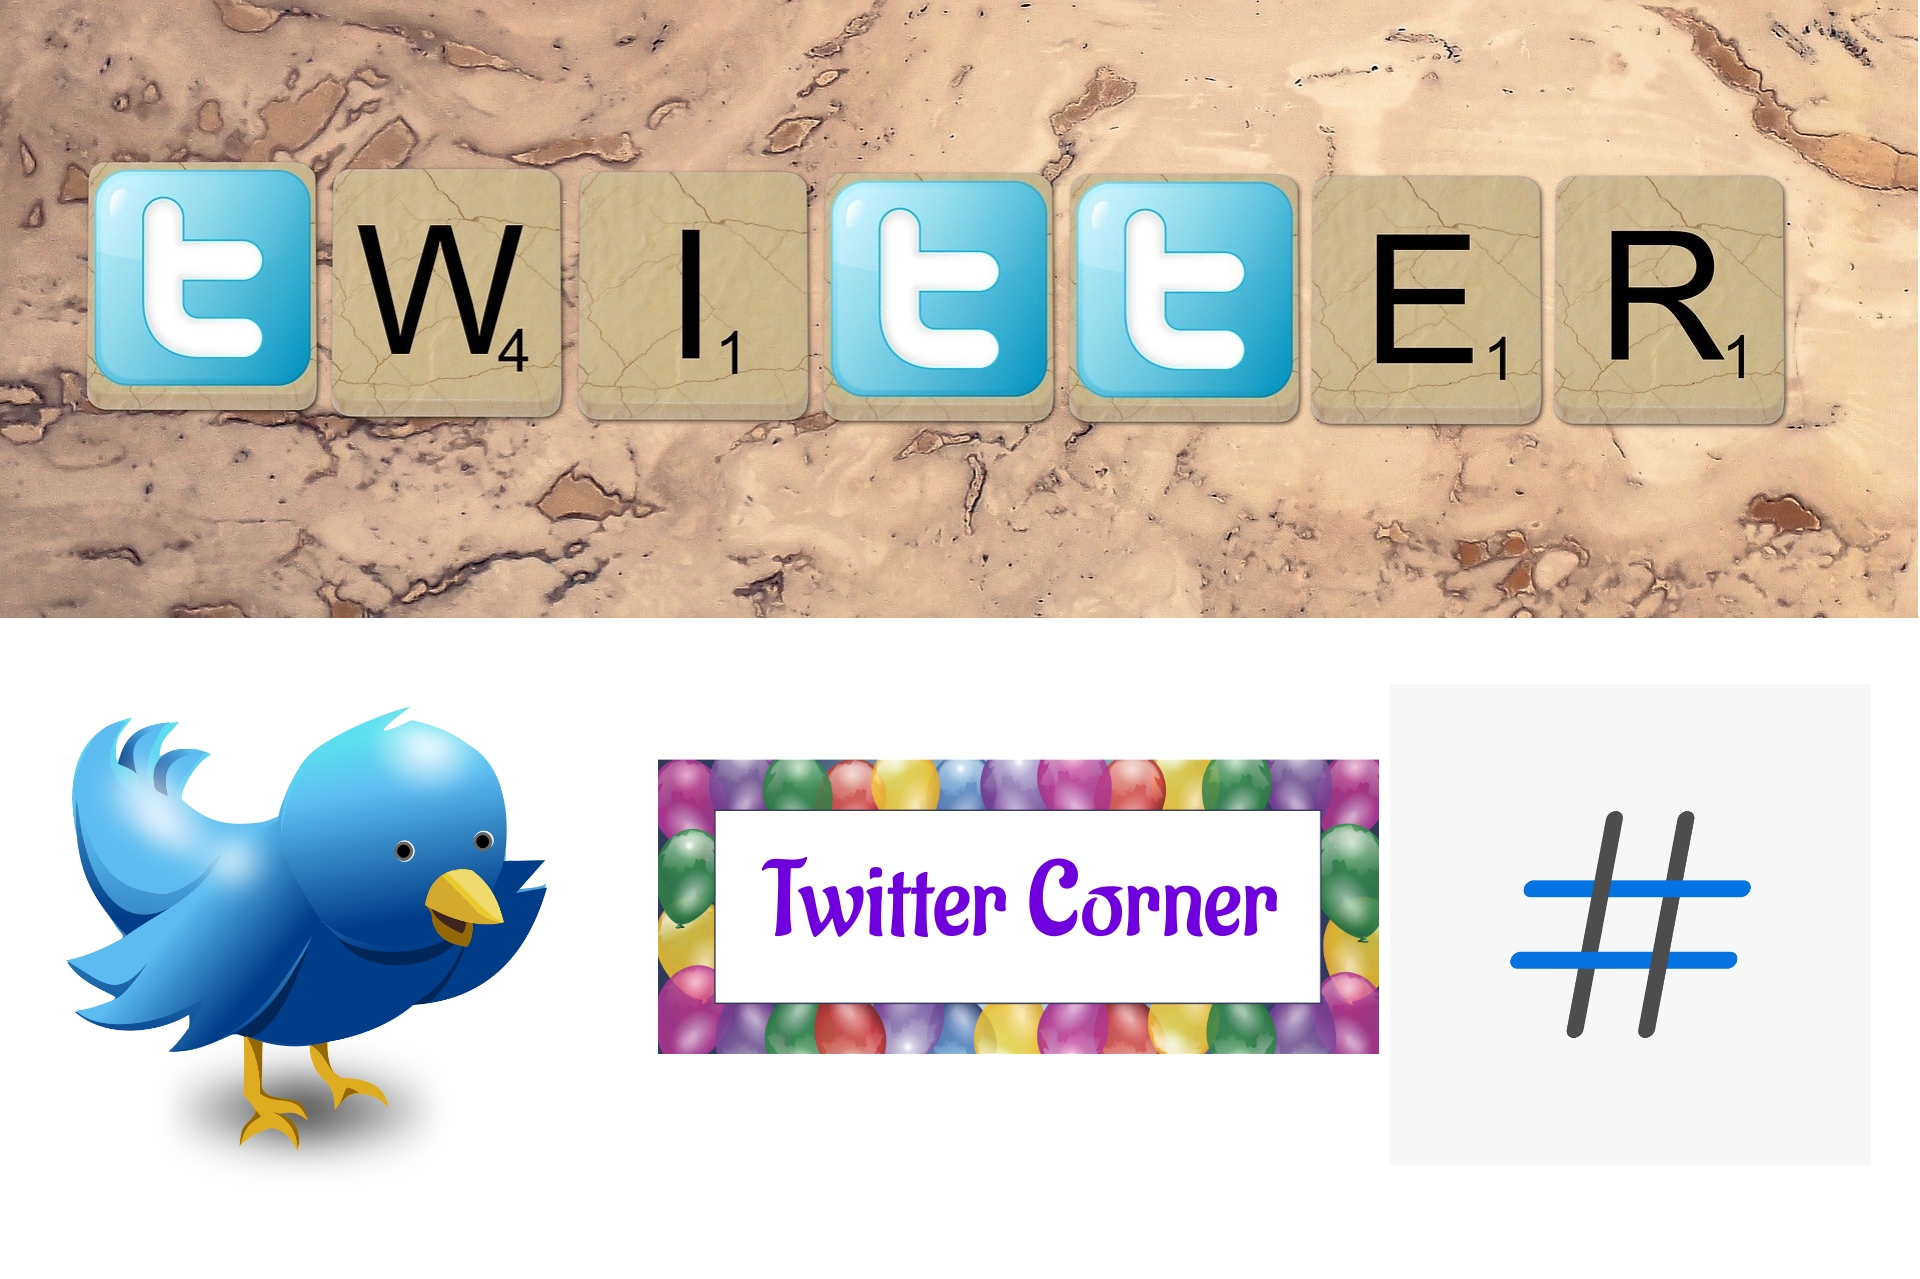 Twitter Corner with hashtag, Scrabble tiles, and the blue bird